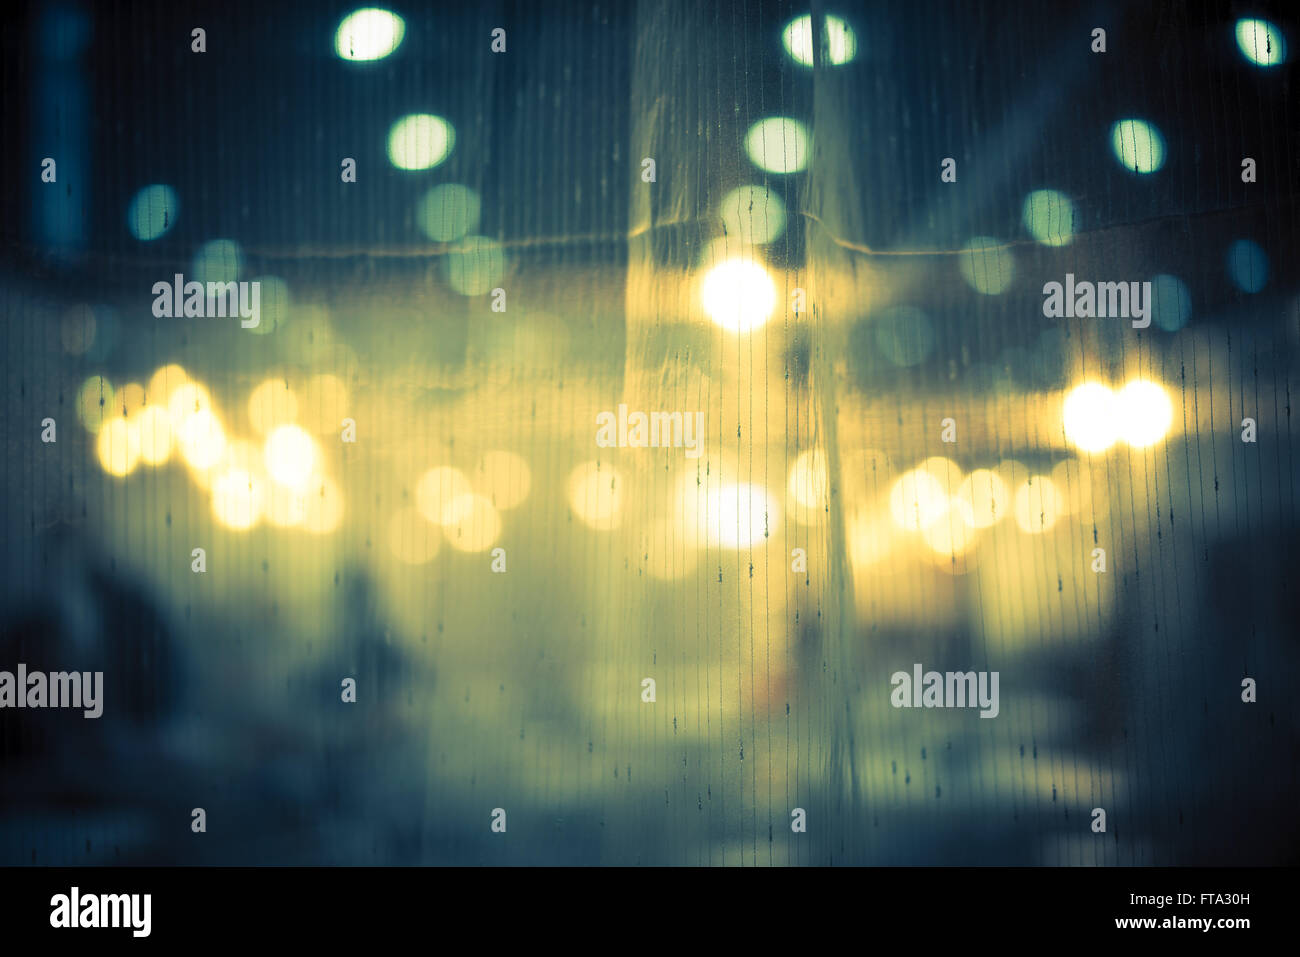 Dark and vintage abstract background of night bokeh through light curtain Stock Photo